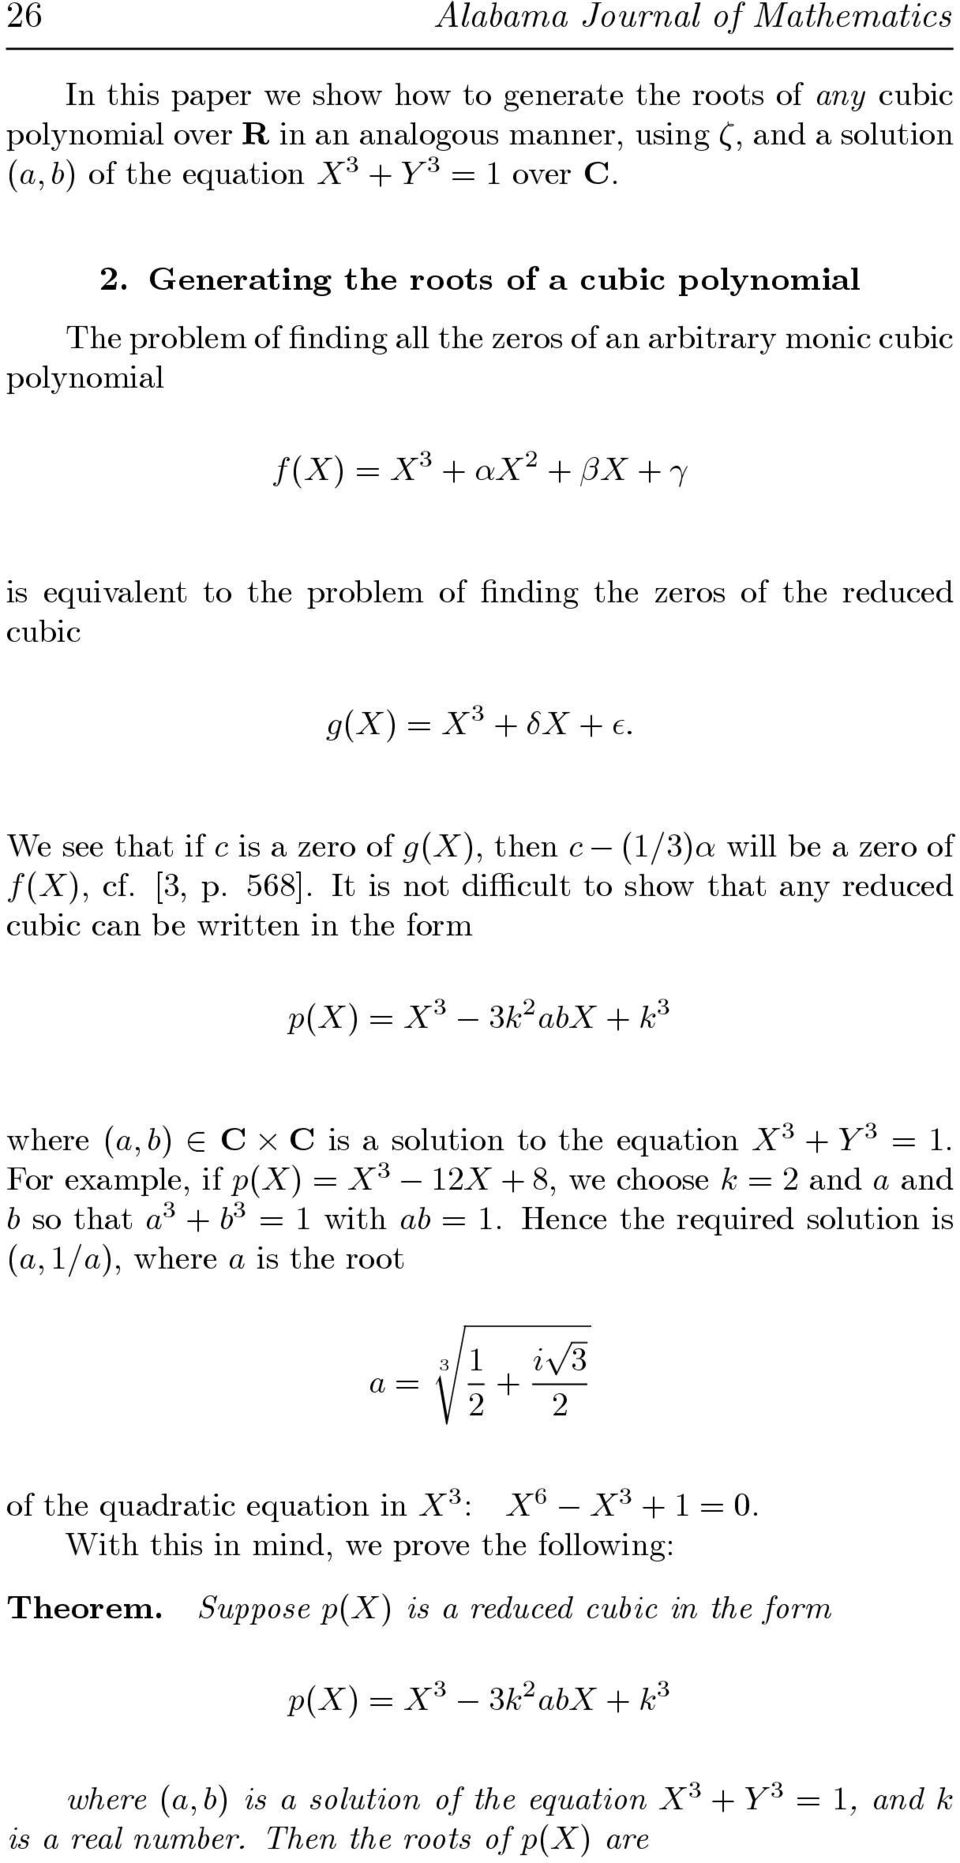 Generating the roots of a cubic polynomial The problem of finding all the zeros of an arbitrary monic cubic polynomial f(x) =X 3 + αx 2 + βx + γ is equivalent to the problem of finding the zeros of